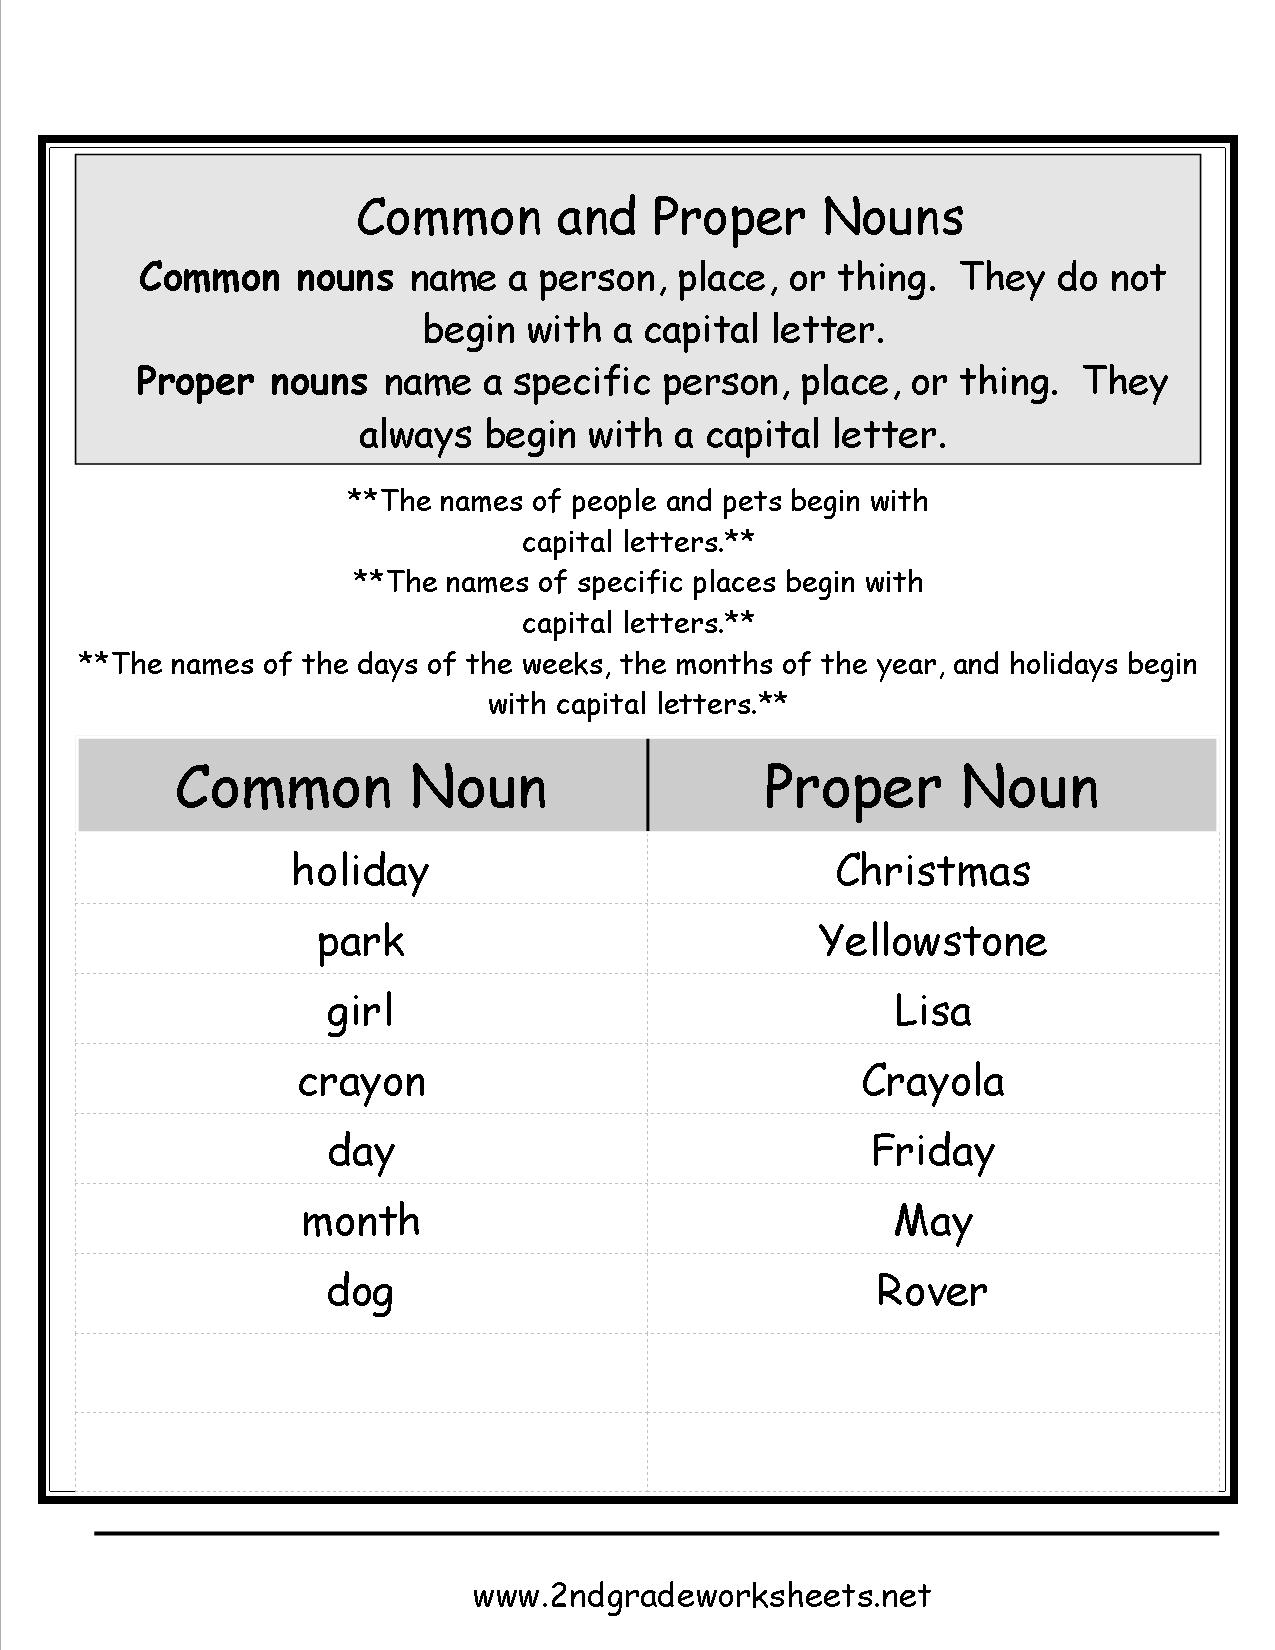 18 Best Images Of Common And Proper Noun Sort Worksheet Common Noun Proper Noun Worksheet